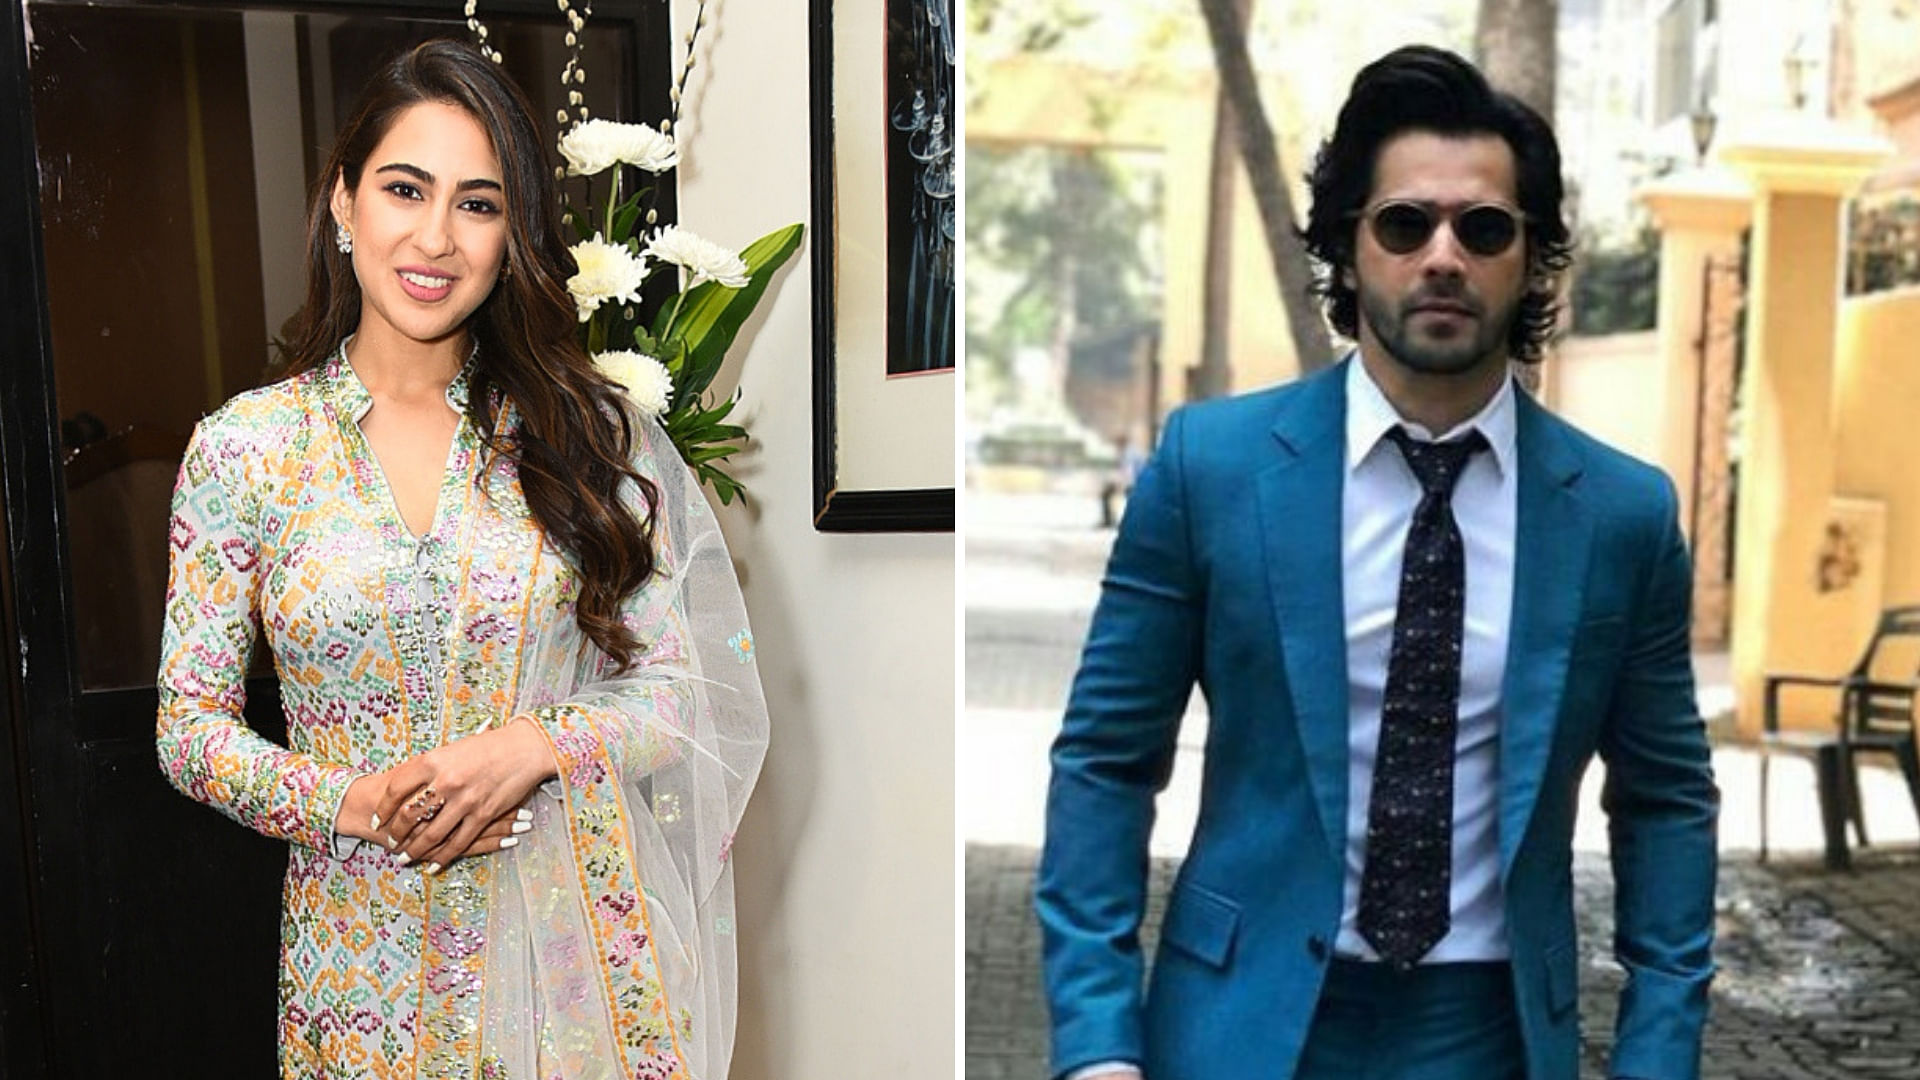 Sara Ali Khan and Varun Dhawan will co-star in a <i>Coolie No 1</i> remake.